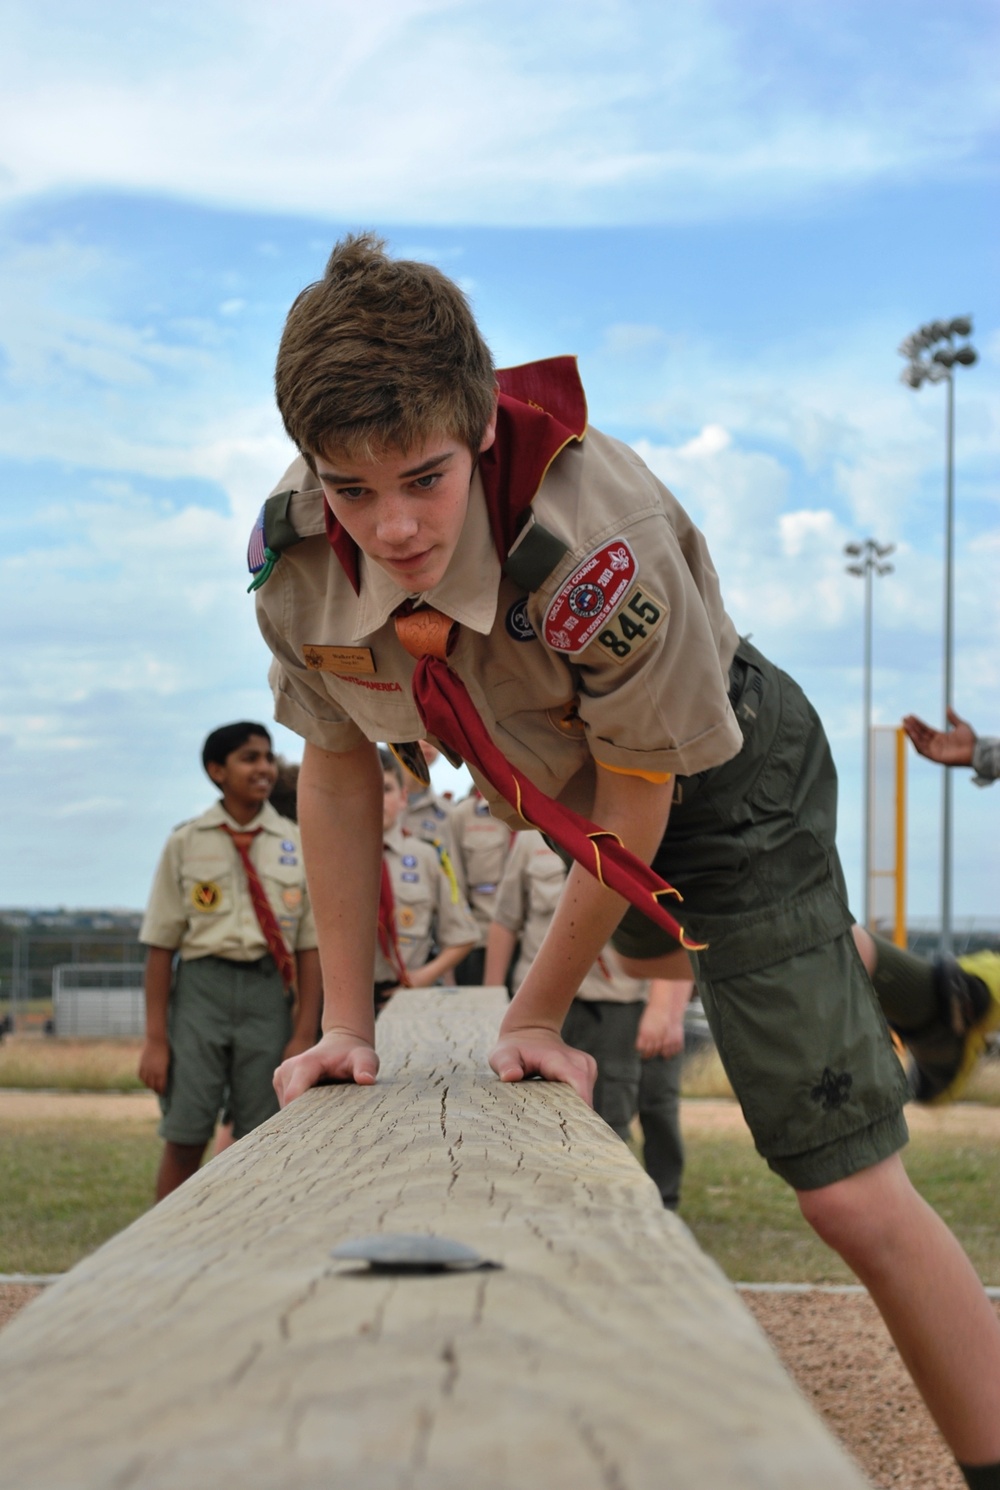 Providers, Boys Scouts focus on confidence-building during visit